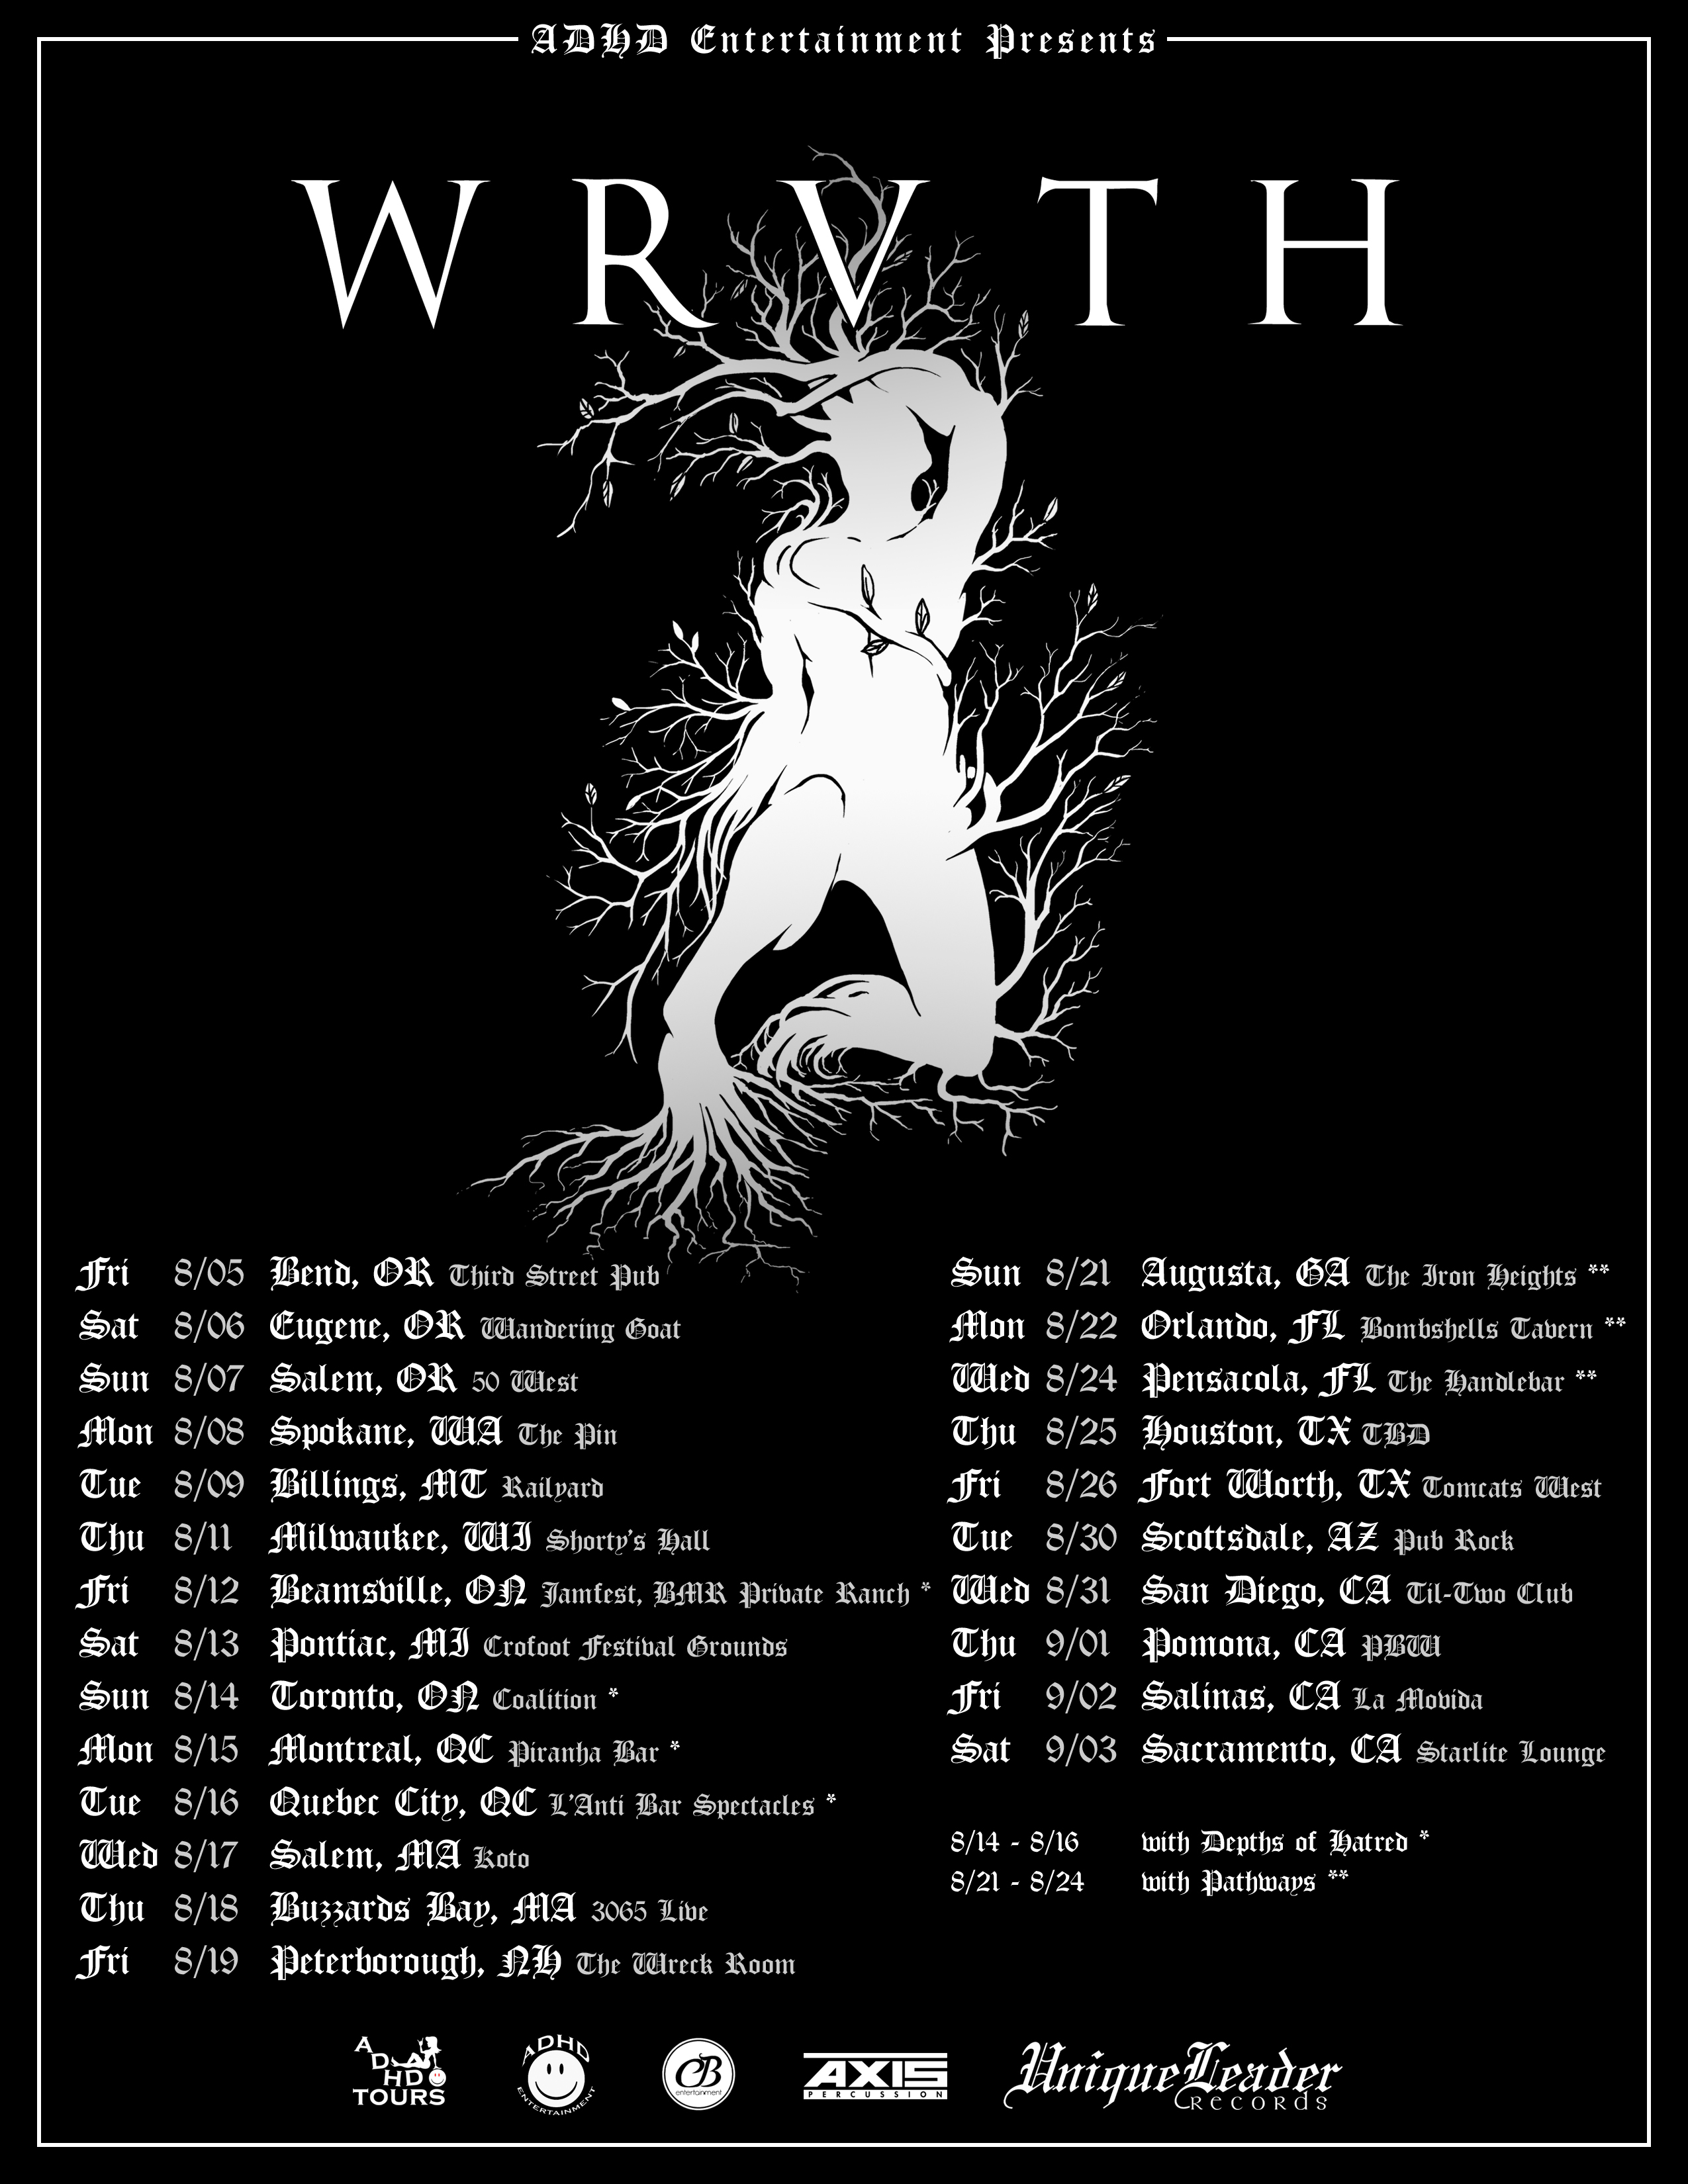 WRVTH_with_dates1